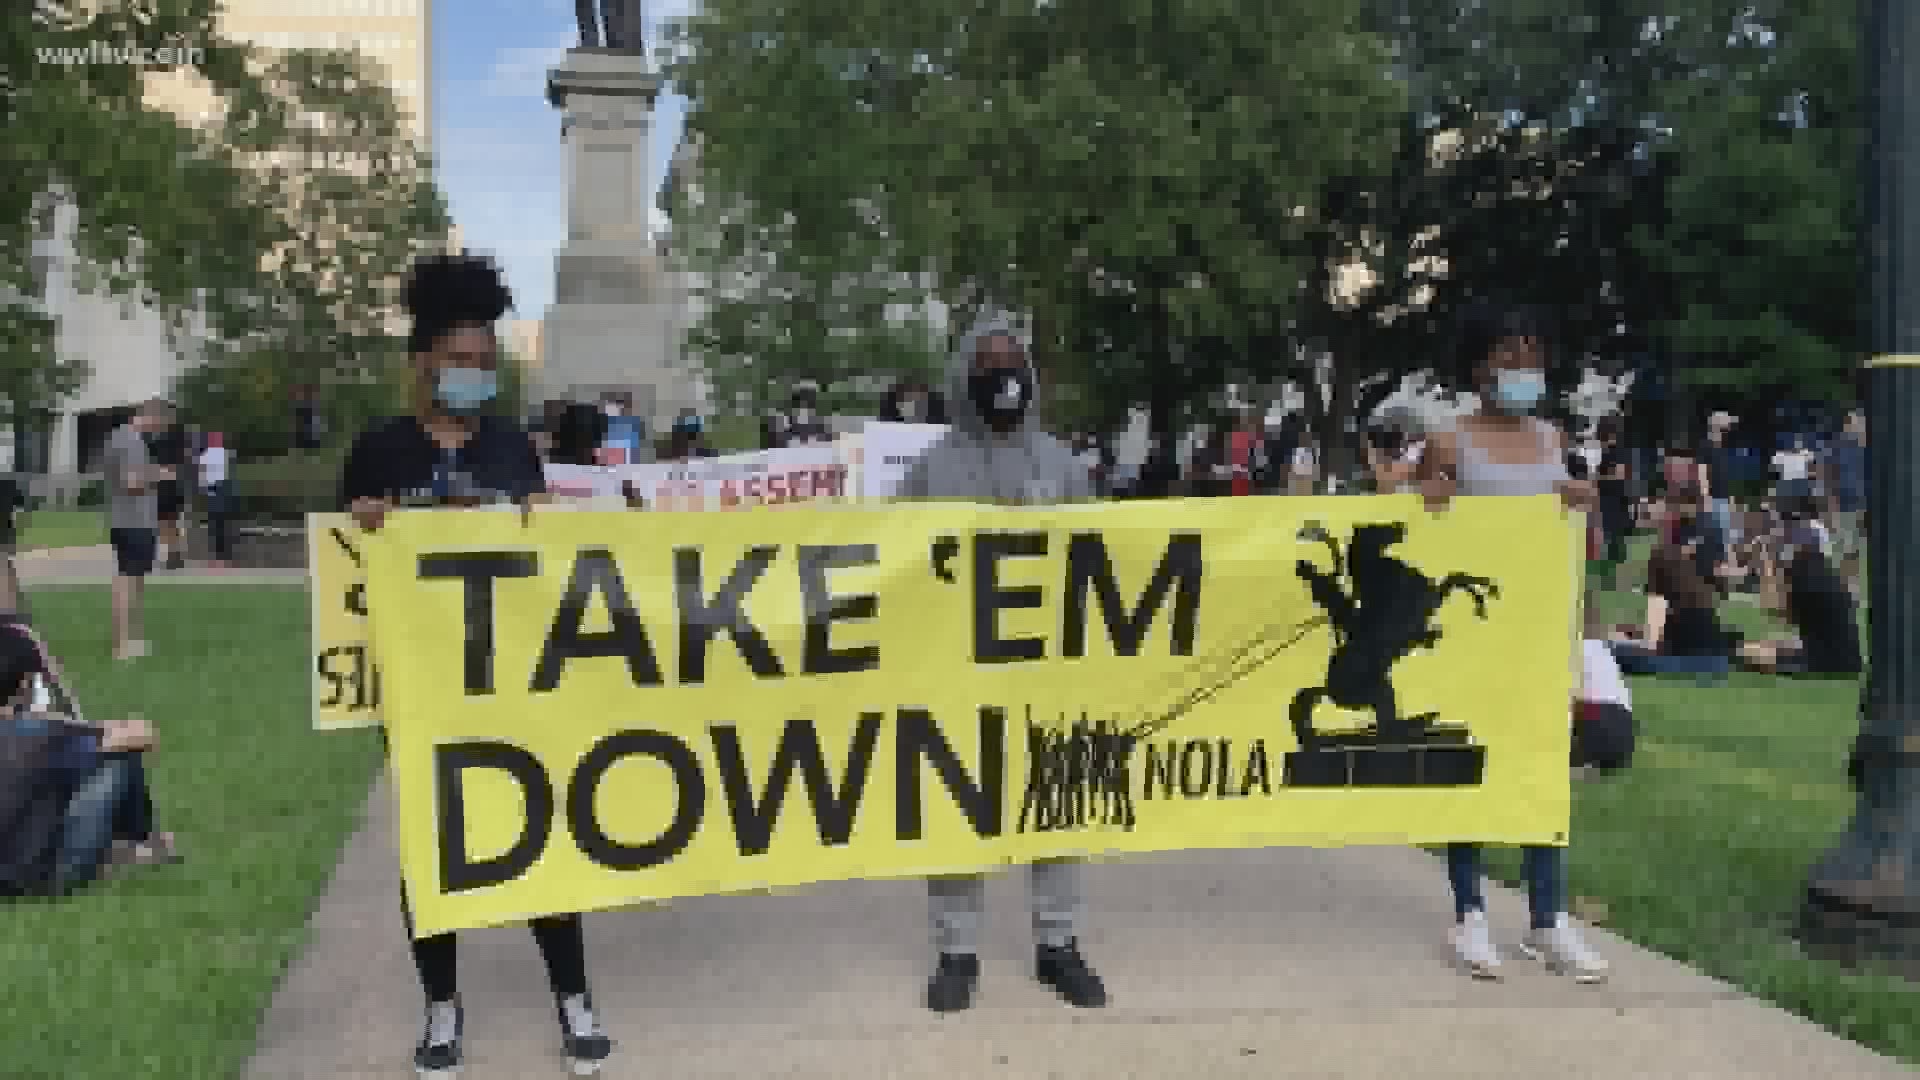 Take 'Em Down Nola hosted a press conference when the group made clear demands to elected New Orleans officials, giving them until the end of June to take action.